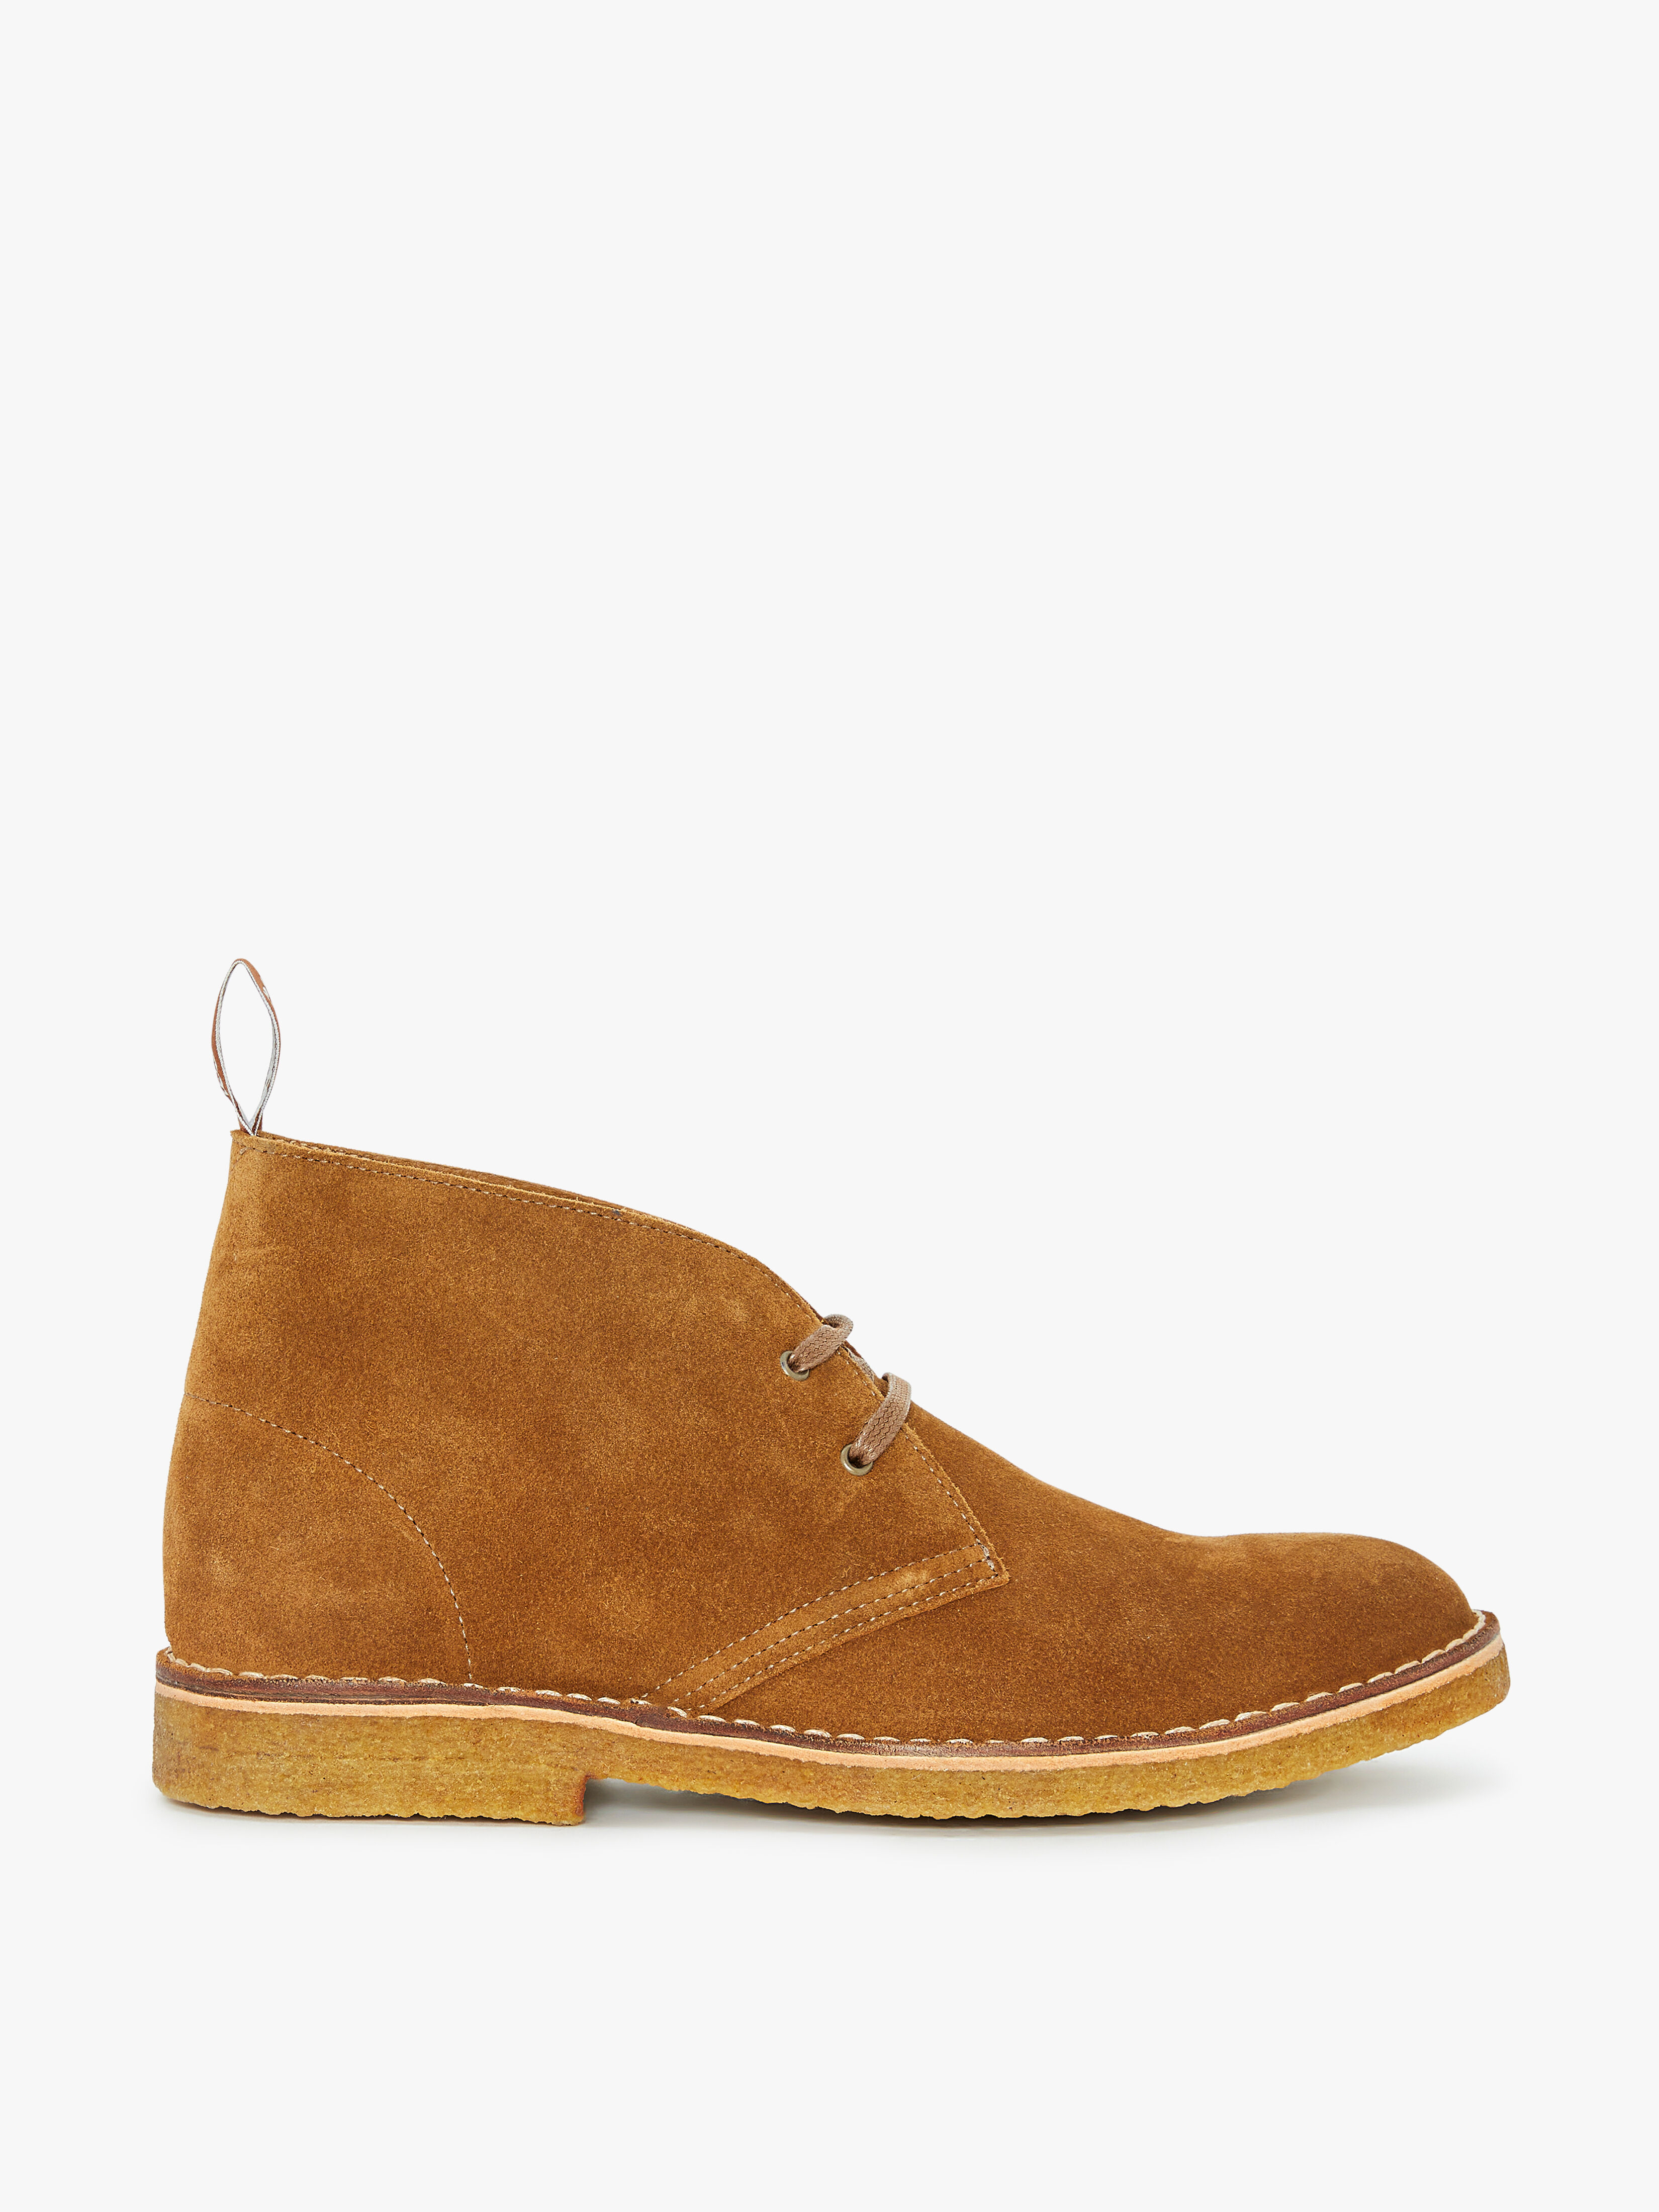 rm williams lace up boots